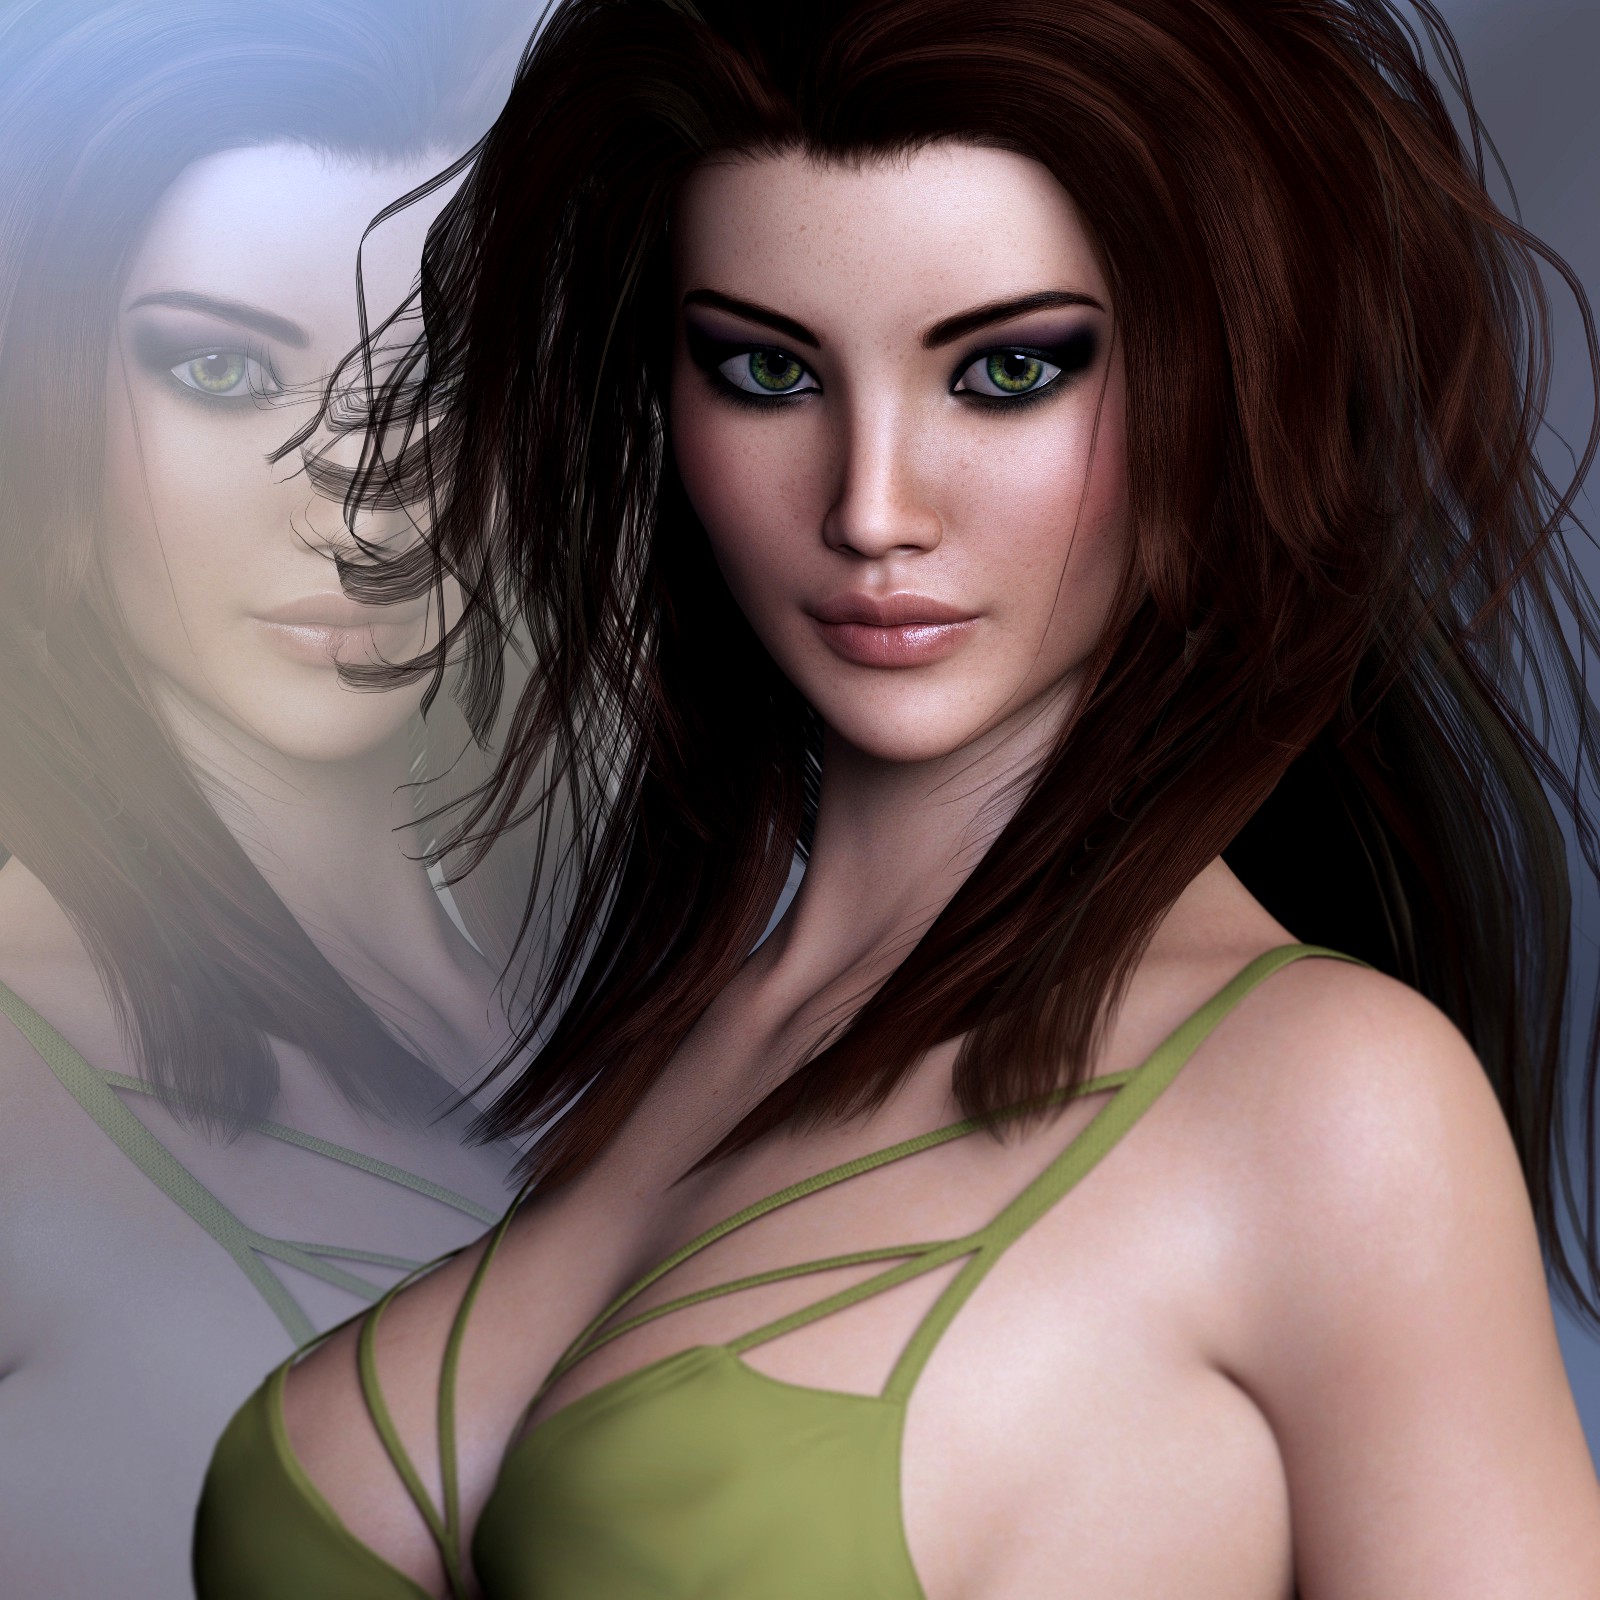 3DS Darby for Genesis 3 Female